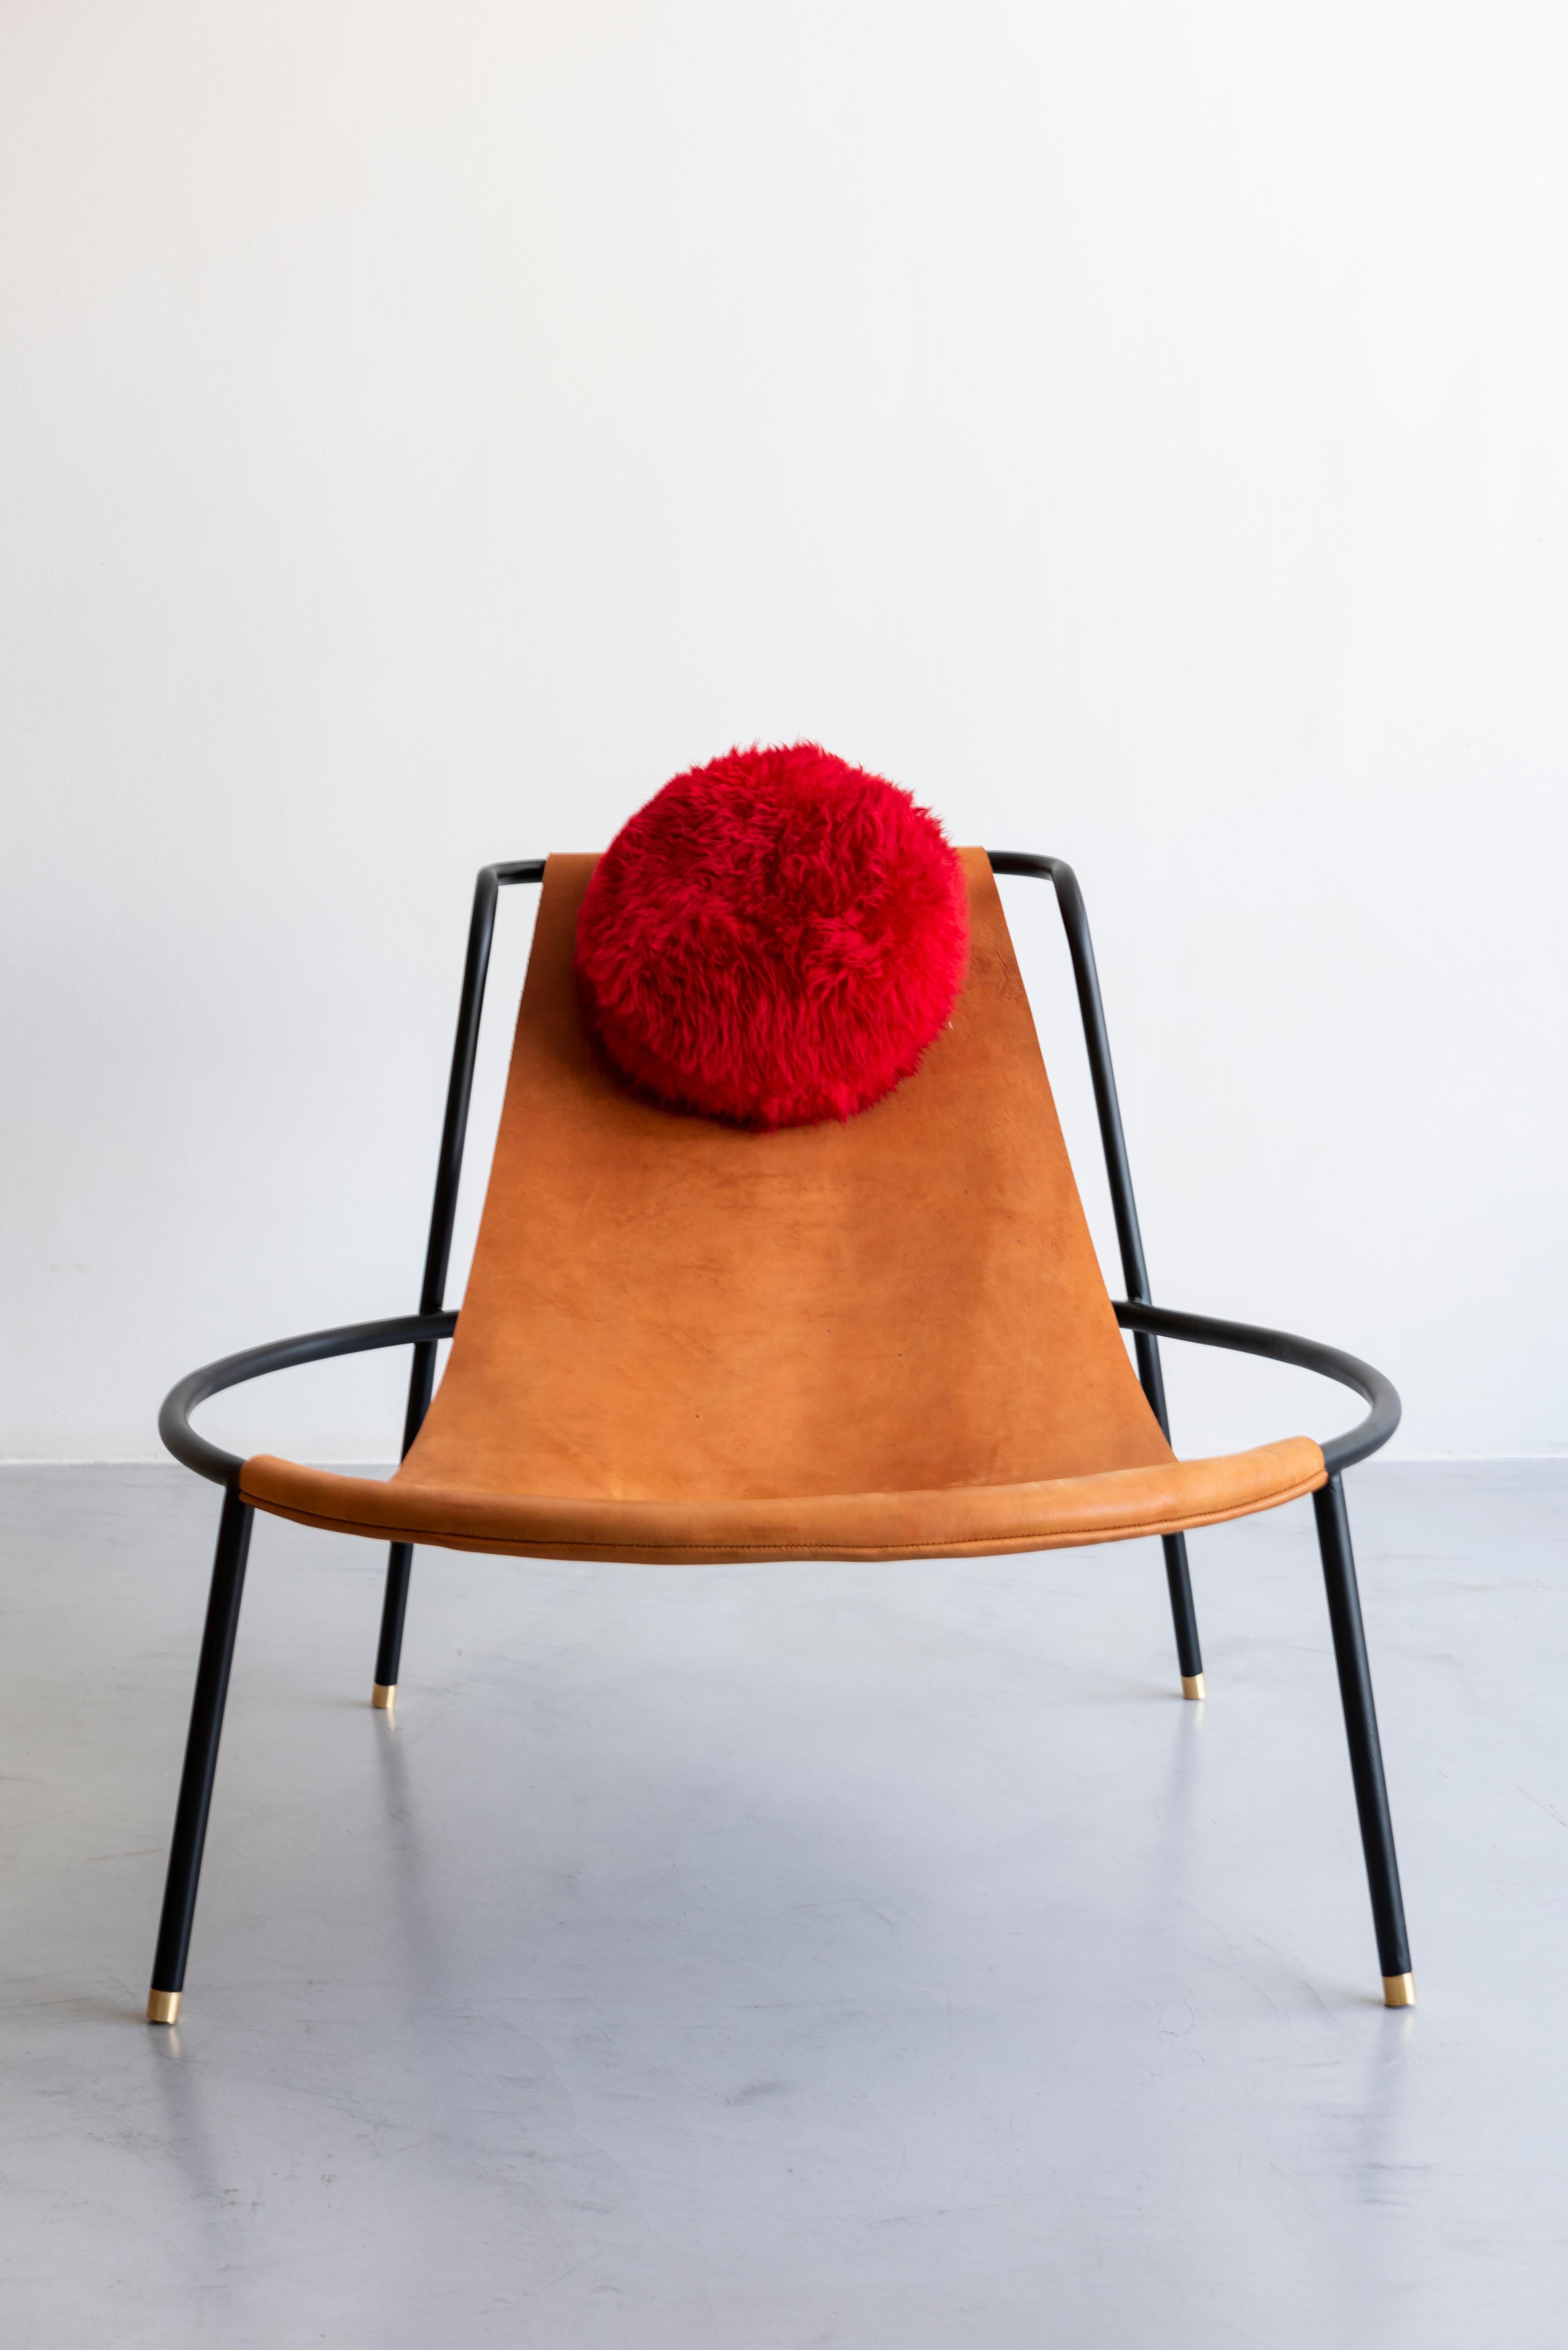 With a strong influence of the furniture designs of Lina Bo Bardi, Paulo Mendes da Rocha and Flávio de Carvalho this chair has a low and relaxed seating. The 90cm diameter circle imparts an aesthetic force of extreme lightness and geometric purism.